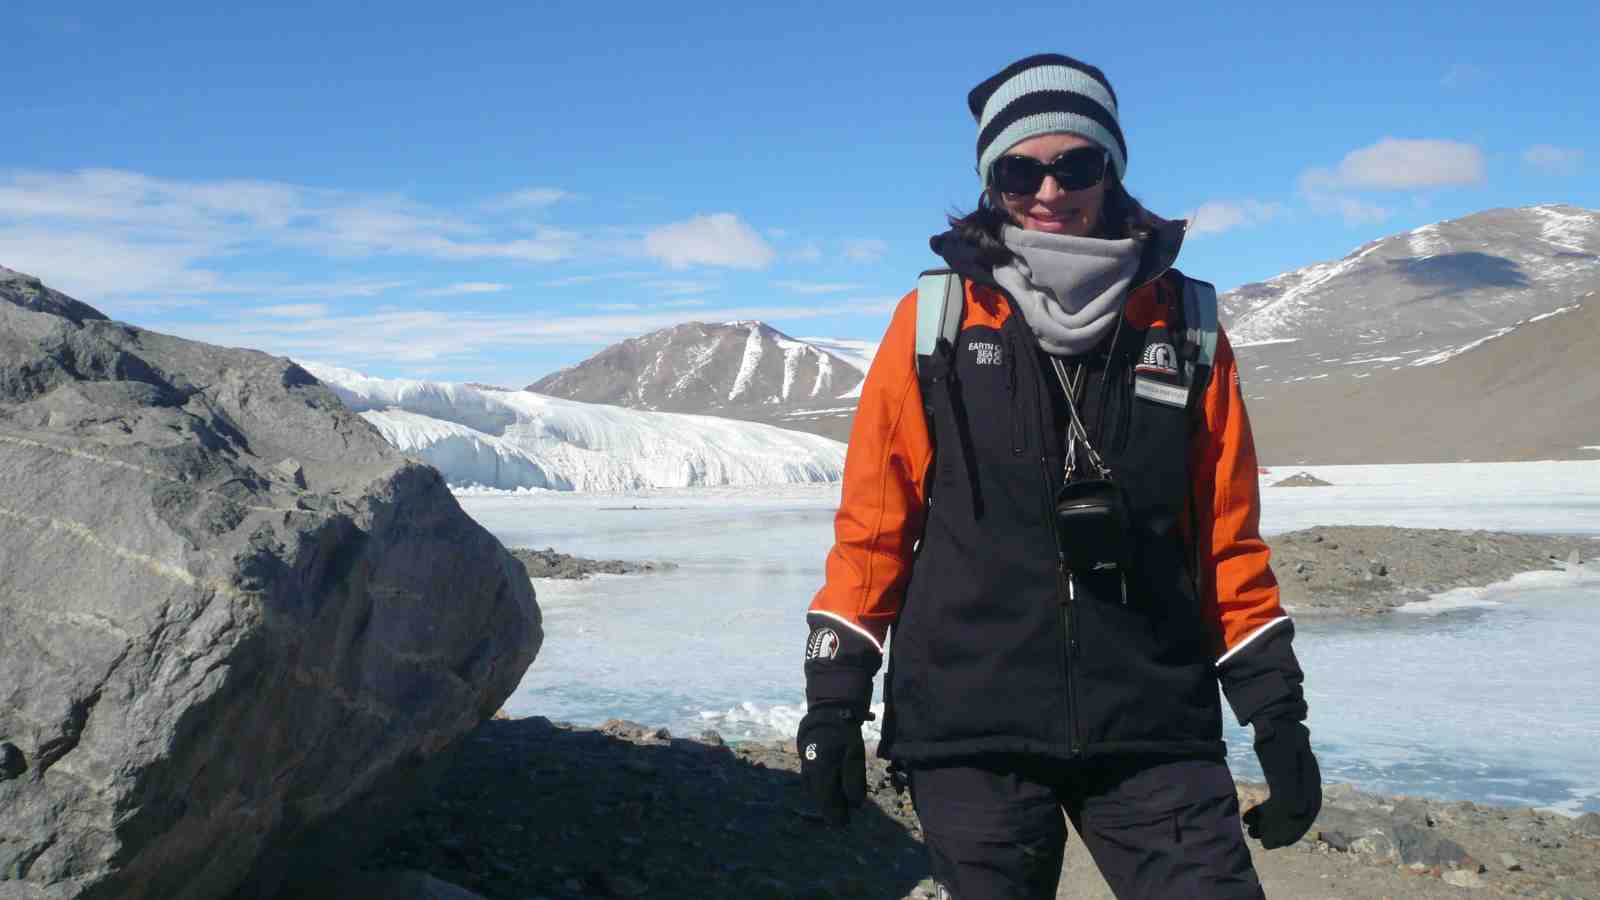 Rebecca Priestley stands in front of mountains and a glacier in Antarctica.